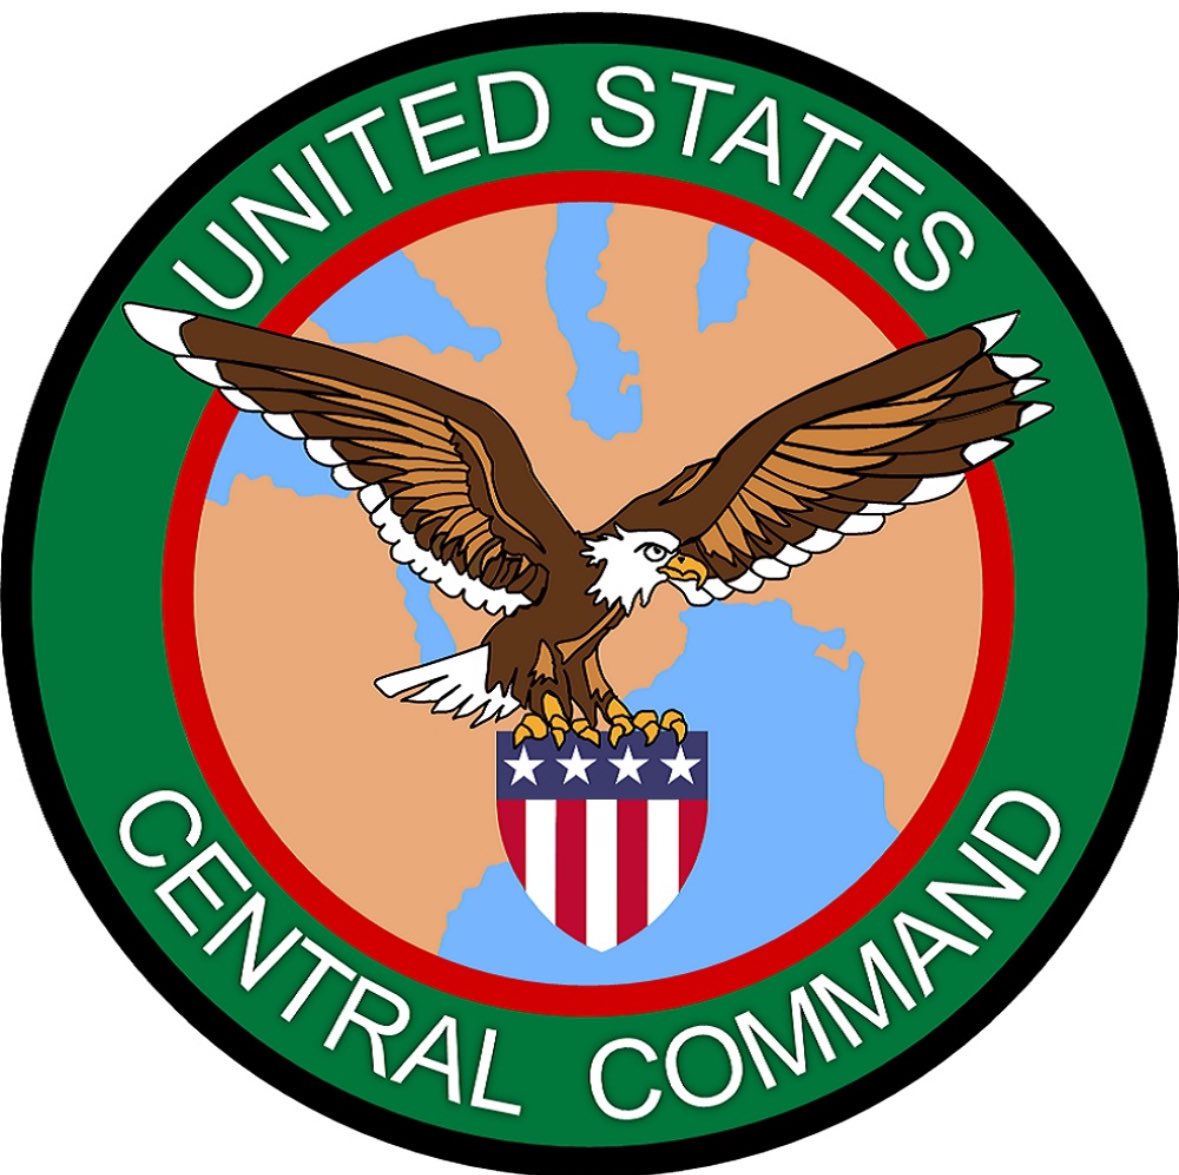 May 11 CENTCOM Update   TAMPA, Fla. – At approximately 8:45 p.m.(Sanaa time) on May 10, Iranian-backed Houthis launched an uncrewed aerial system (UAS) over the Gulf of Aden from Houthi controlled areas in Yemen. A coalition aircraft successfully engaged the UAS. There were no…